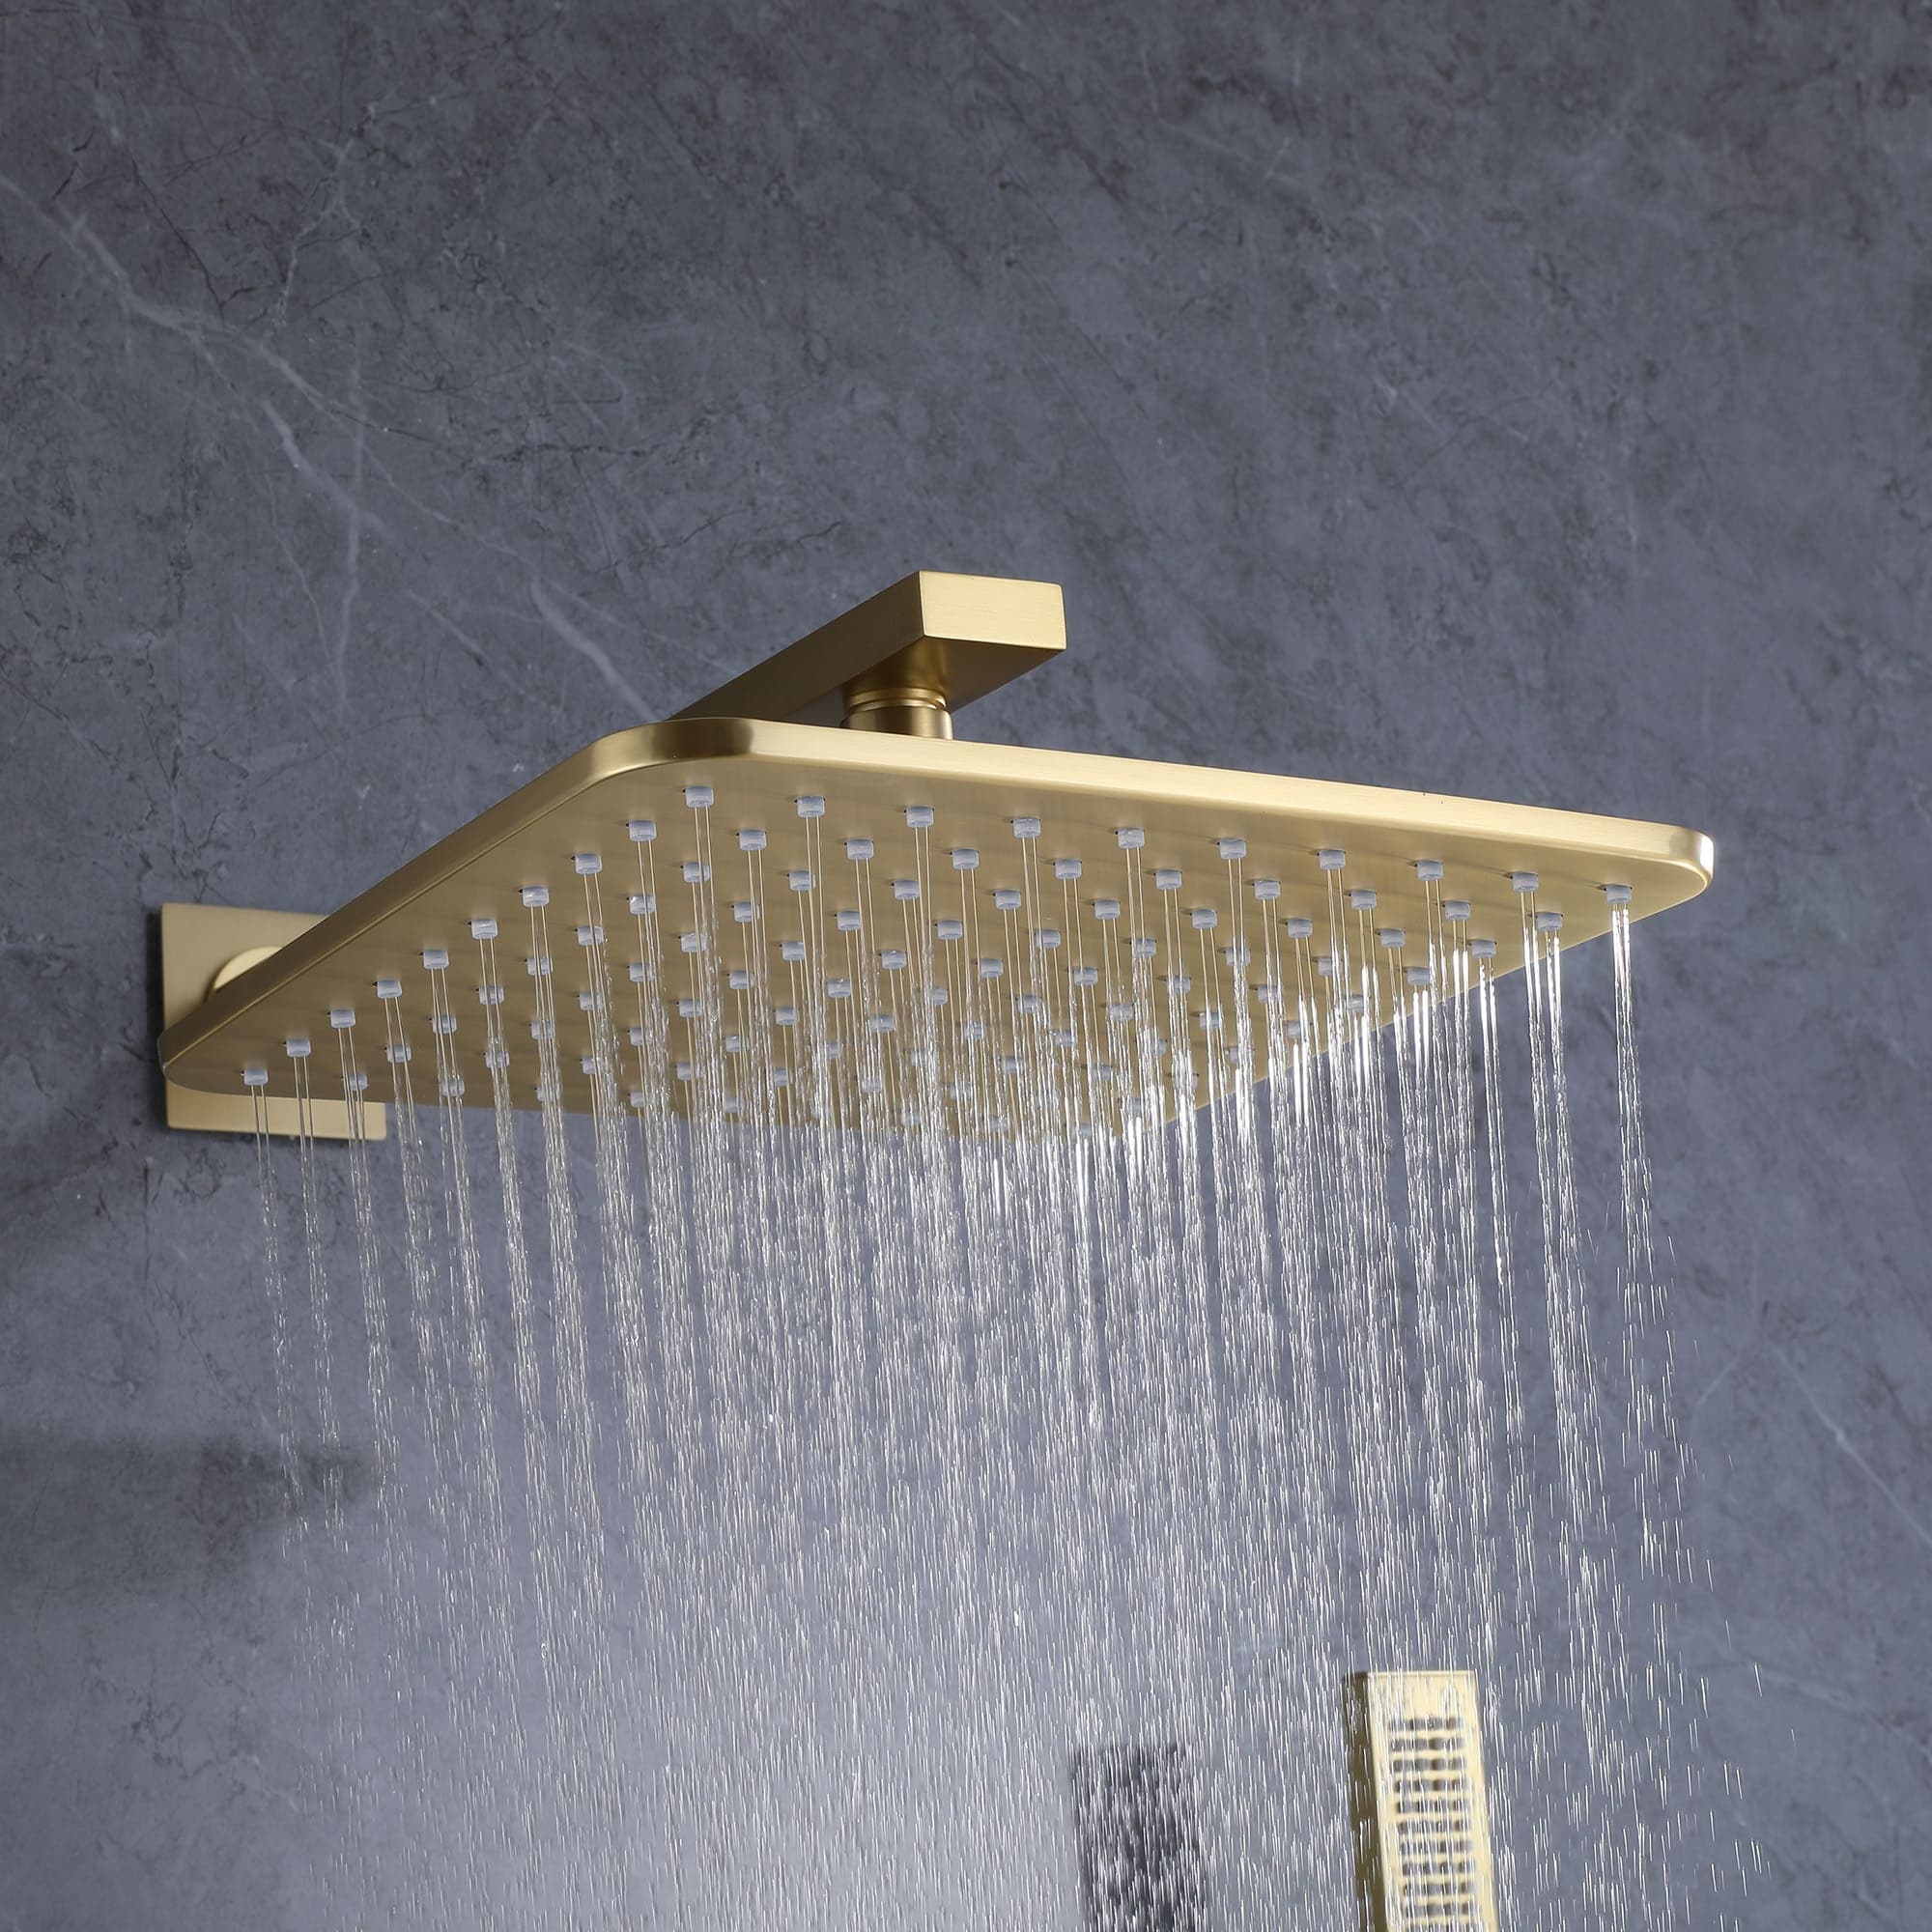 https://ak1.ostkcdn.com/images/products/is/images/direct/88a2c18035863e9d017af30d856d7440674d1b21/Thermostatic-Shower-System-With-Rough-in-Valve-Bathroom-Shower-Faucet-With-Hand-Shower-And-Body-Jet-Rain-10-Inch-Shower-Head-Set.jpg